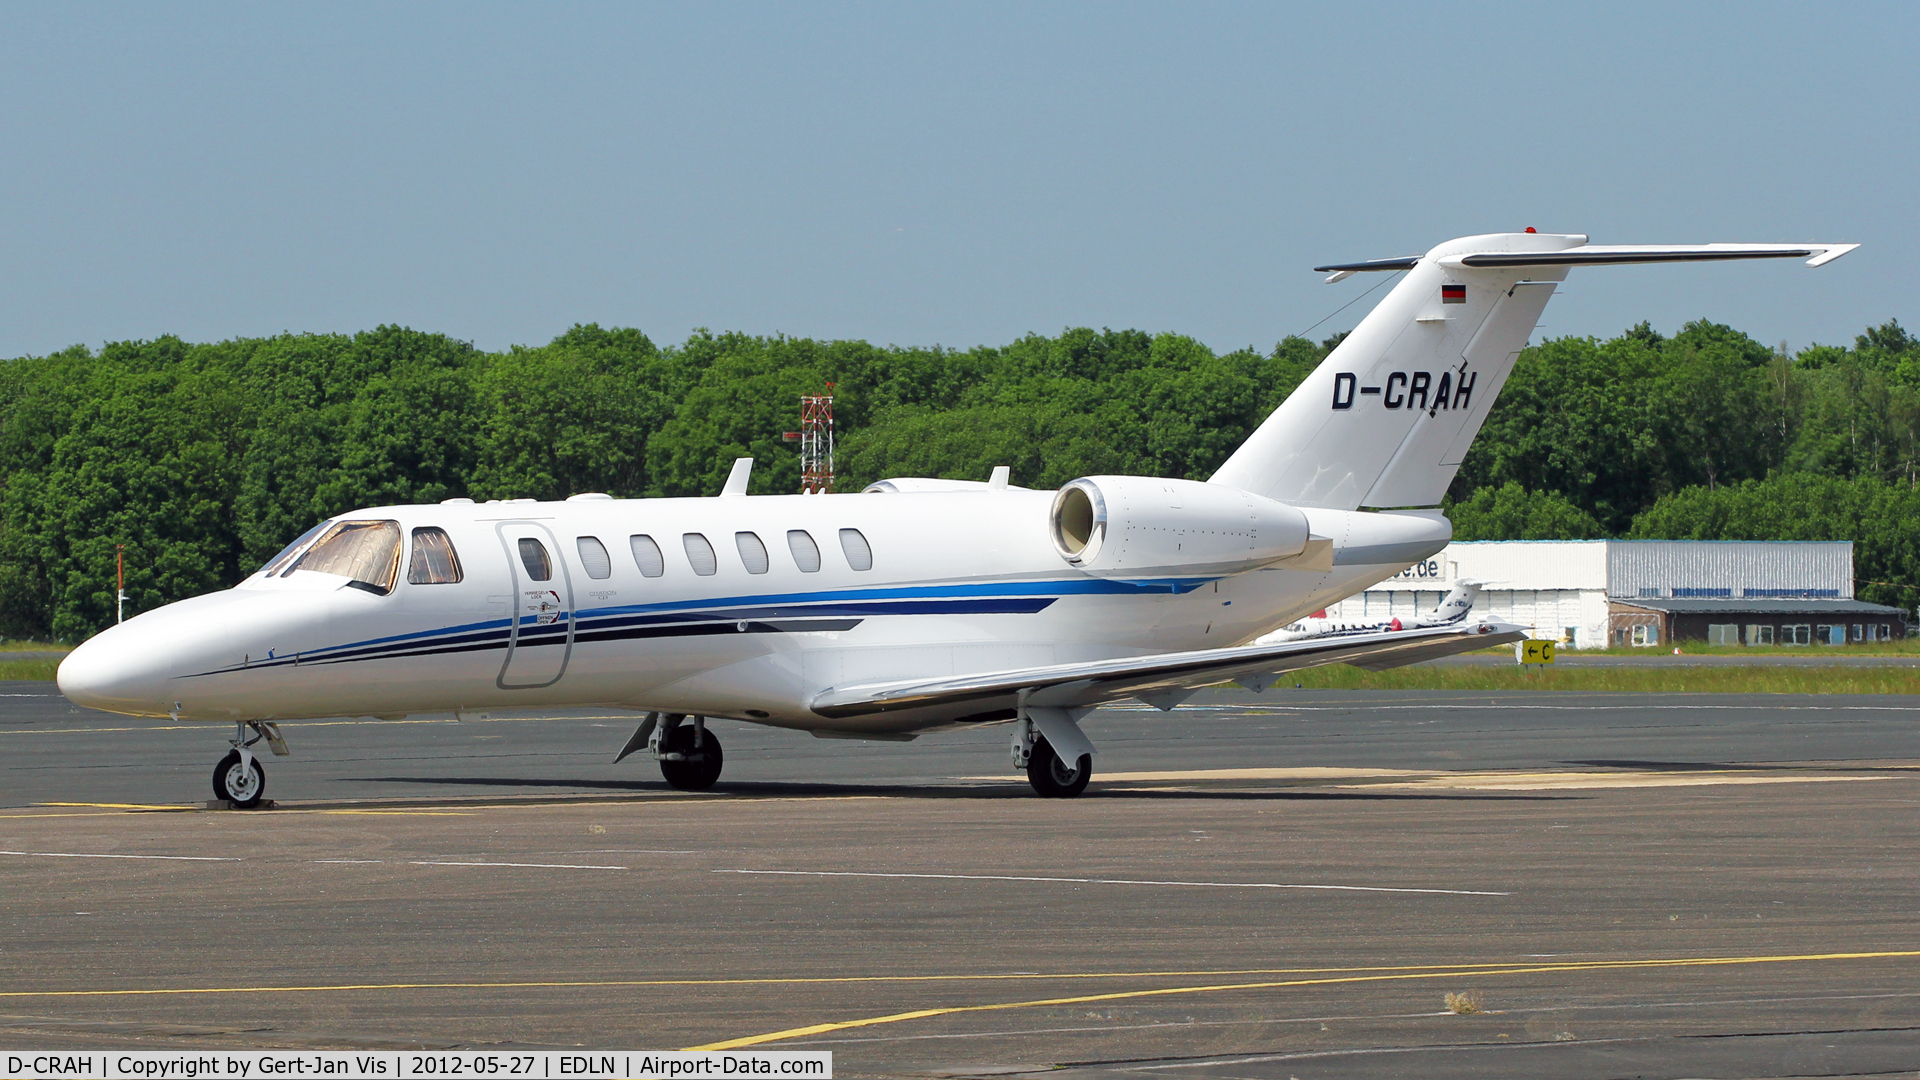 D-CRAH, 2007 Cessna 525B CitationJet CJ3 C/N 525B-0154, Standing in front of the terminal